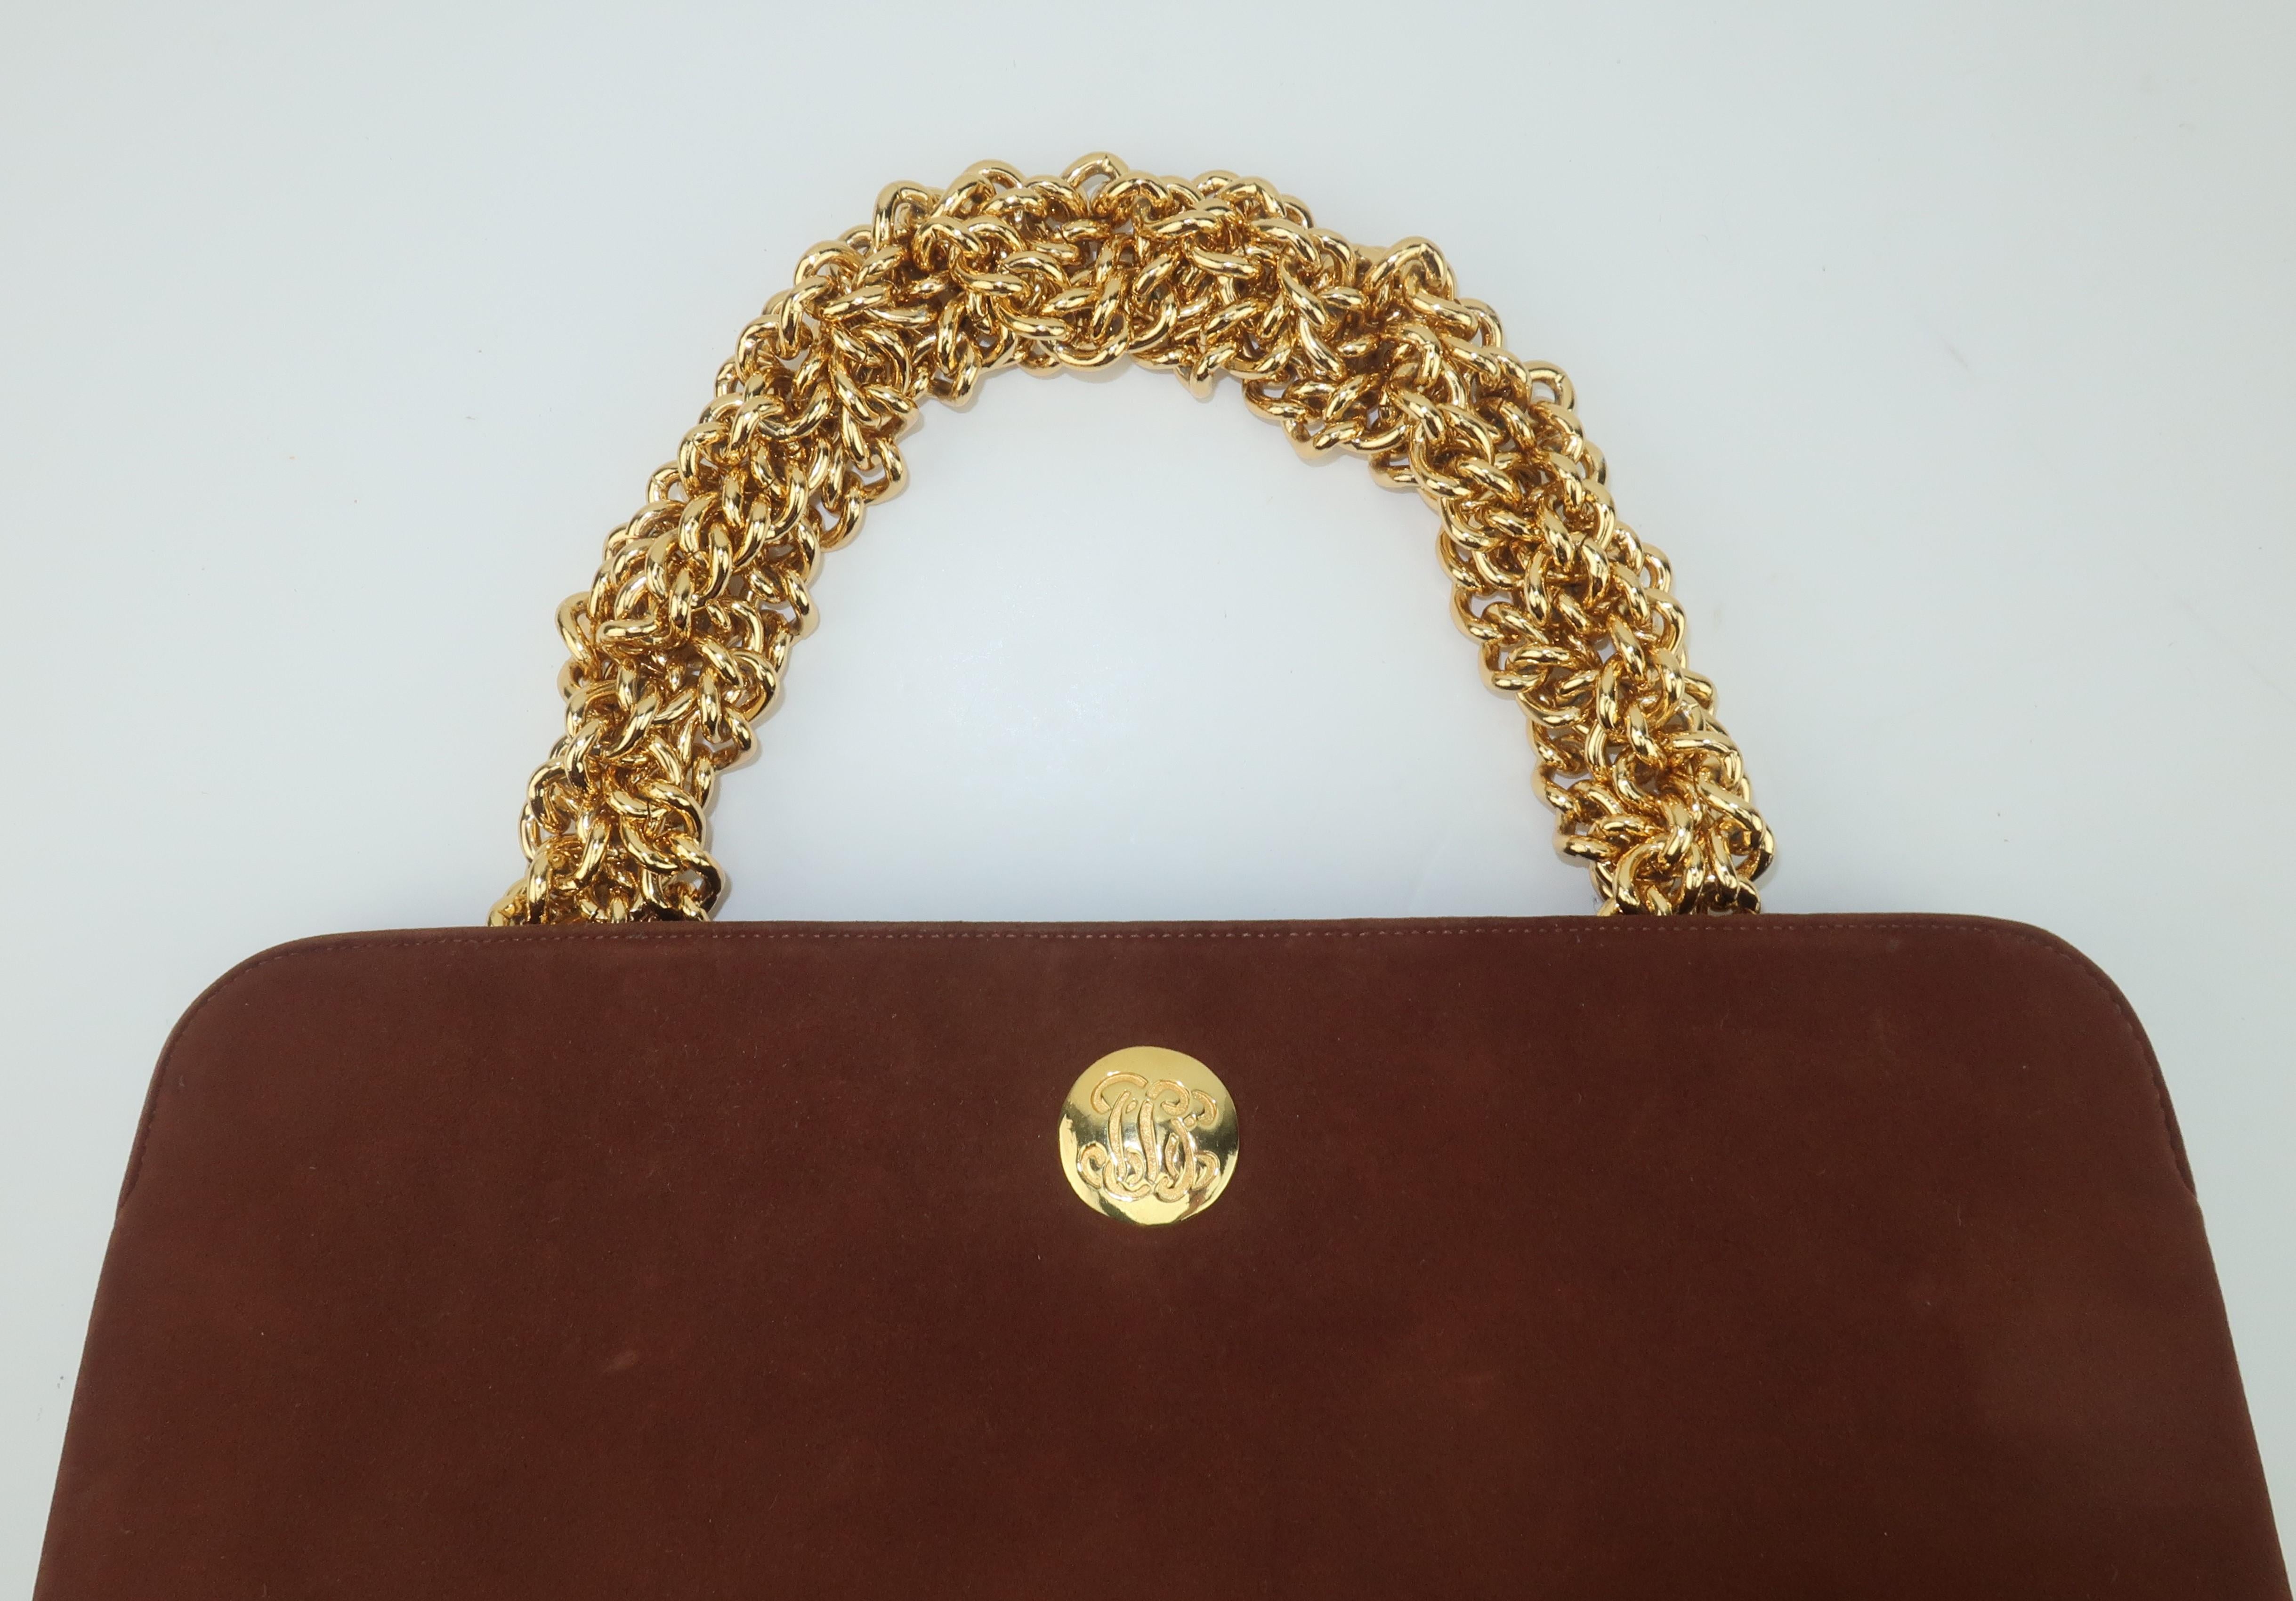 A classic 1960's chocolate brown handbag with a unique chunky gold chain handle fabricated by Koret from their 'non-crockable' or non-shedding kid suede which was coined as 'Koretolope'.  The hidden push button closure opens to reveal a faille